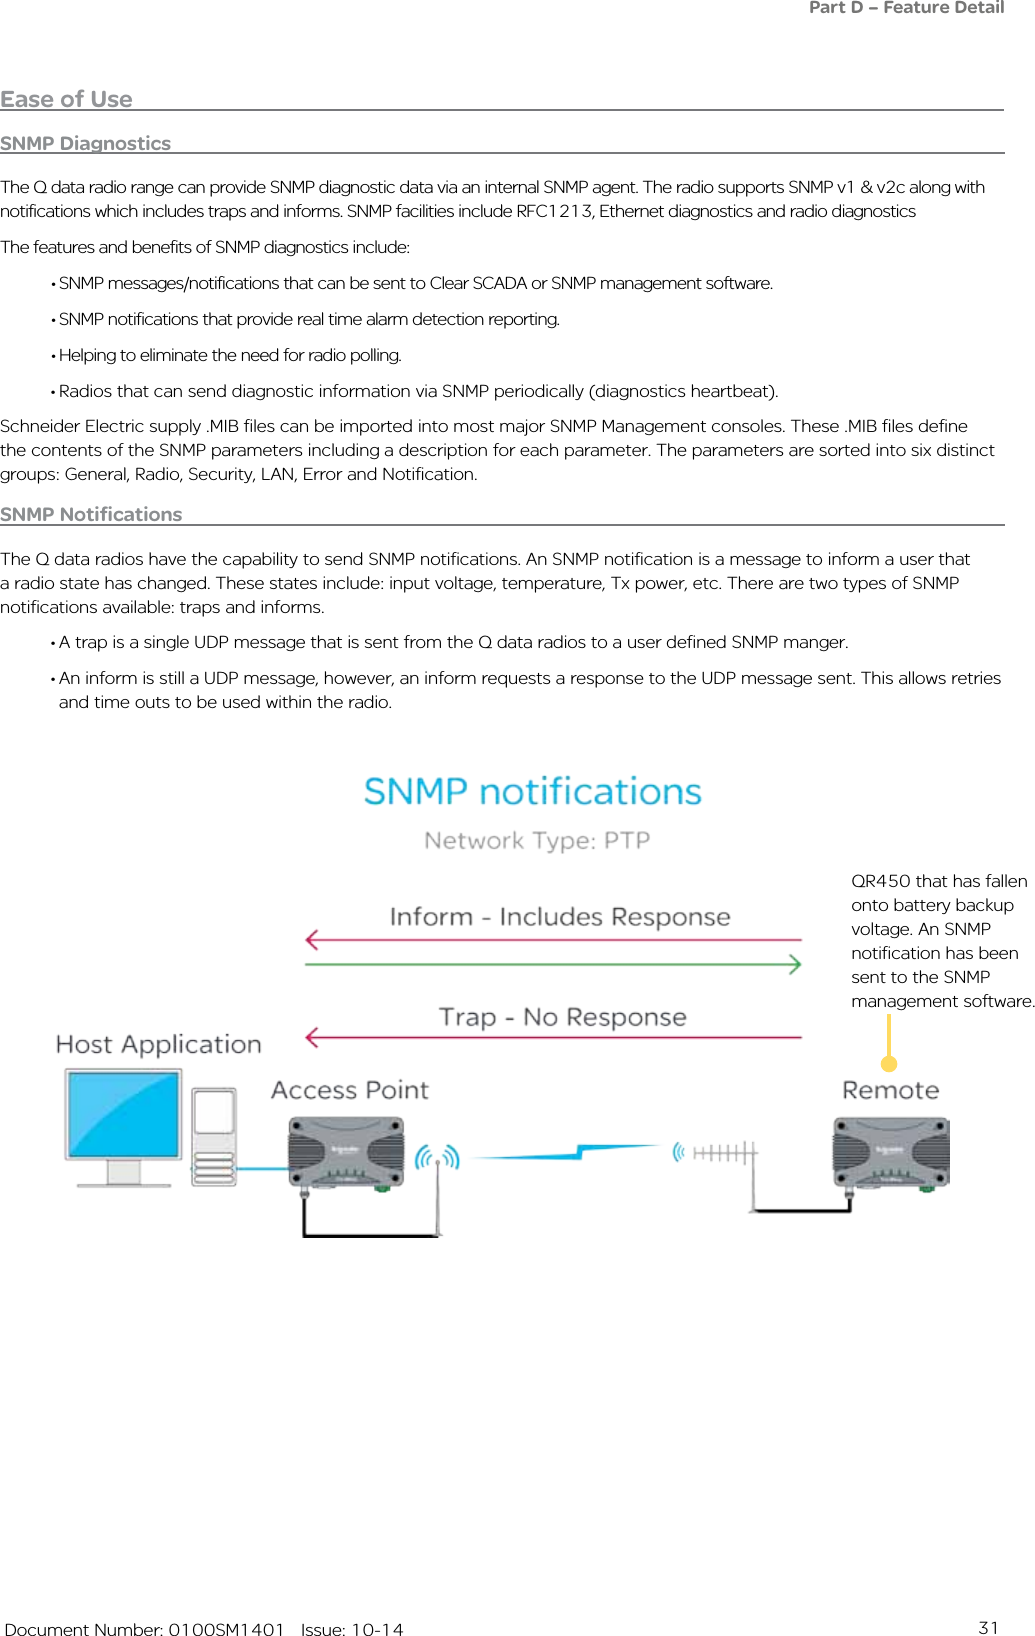 31   Document Number: 0100SM1401   Issue: 10-14SNMP DiagnosticsThe Q data radio range can provide SNMP diagnostic data via an internal SNMP agent. The radio supports SNMP v1 &amp; v2c along with notifications which includes traps and informs. SNMP facilities include RFC1213, Ethernet diagnostics and radio diagnosticsThe features and benefits of SNMP diagnostics include:•SNMP messages/notifications that can be sent to Clear SCADA or SNMP management software.•SNMP notifications that provide real time alarm detection reporting.•Helping to eliminate the need for radio polling.•Radios that can send diagnostic information via SNMP periodically (diagnostics heartbeat).Schneider Electric supply .MIB files can be imported into most major SNMP Management consoles. These .MIB files define the contents of the SNMP parameters including a description for each parameter. The parameters are sorted into six distinct groups: General, Radio, Security, LAN, Error and Notification.SNMP NotificationsThe Q data radios have the capability to send SNMP notifications. An SNMP notification is a message to inform a user that a radio state has changed. These states include: input voltage, temperature, Tx power, etc. There are two types of SNMP notifications available: traps and informs.•A trap is a single UDP message that is sent from the Q data radios to a user defined SNMP manger. •An inform is still a UDP message, however, an inform requests a response to the UDP message sent. This allows retries and time outs to be used within the radio. QR450 that has fallen onto battery backup voltage. An SNMP notification has been sent to the SNMP management software.Ease of UsePart D – Feature Detail